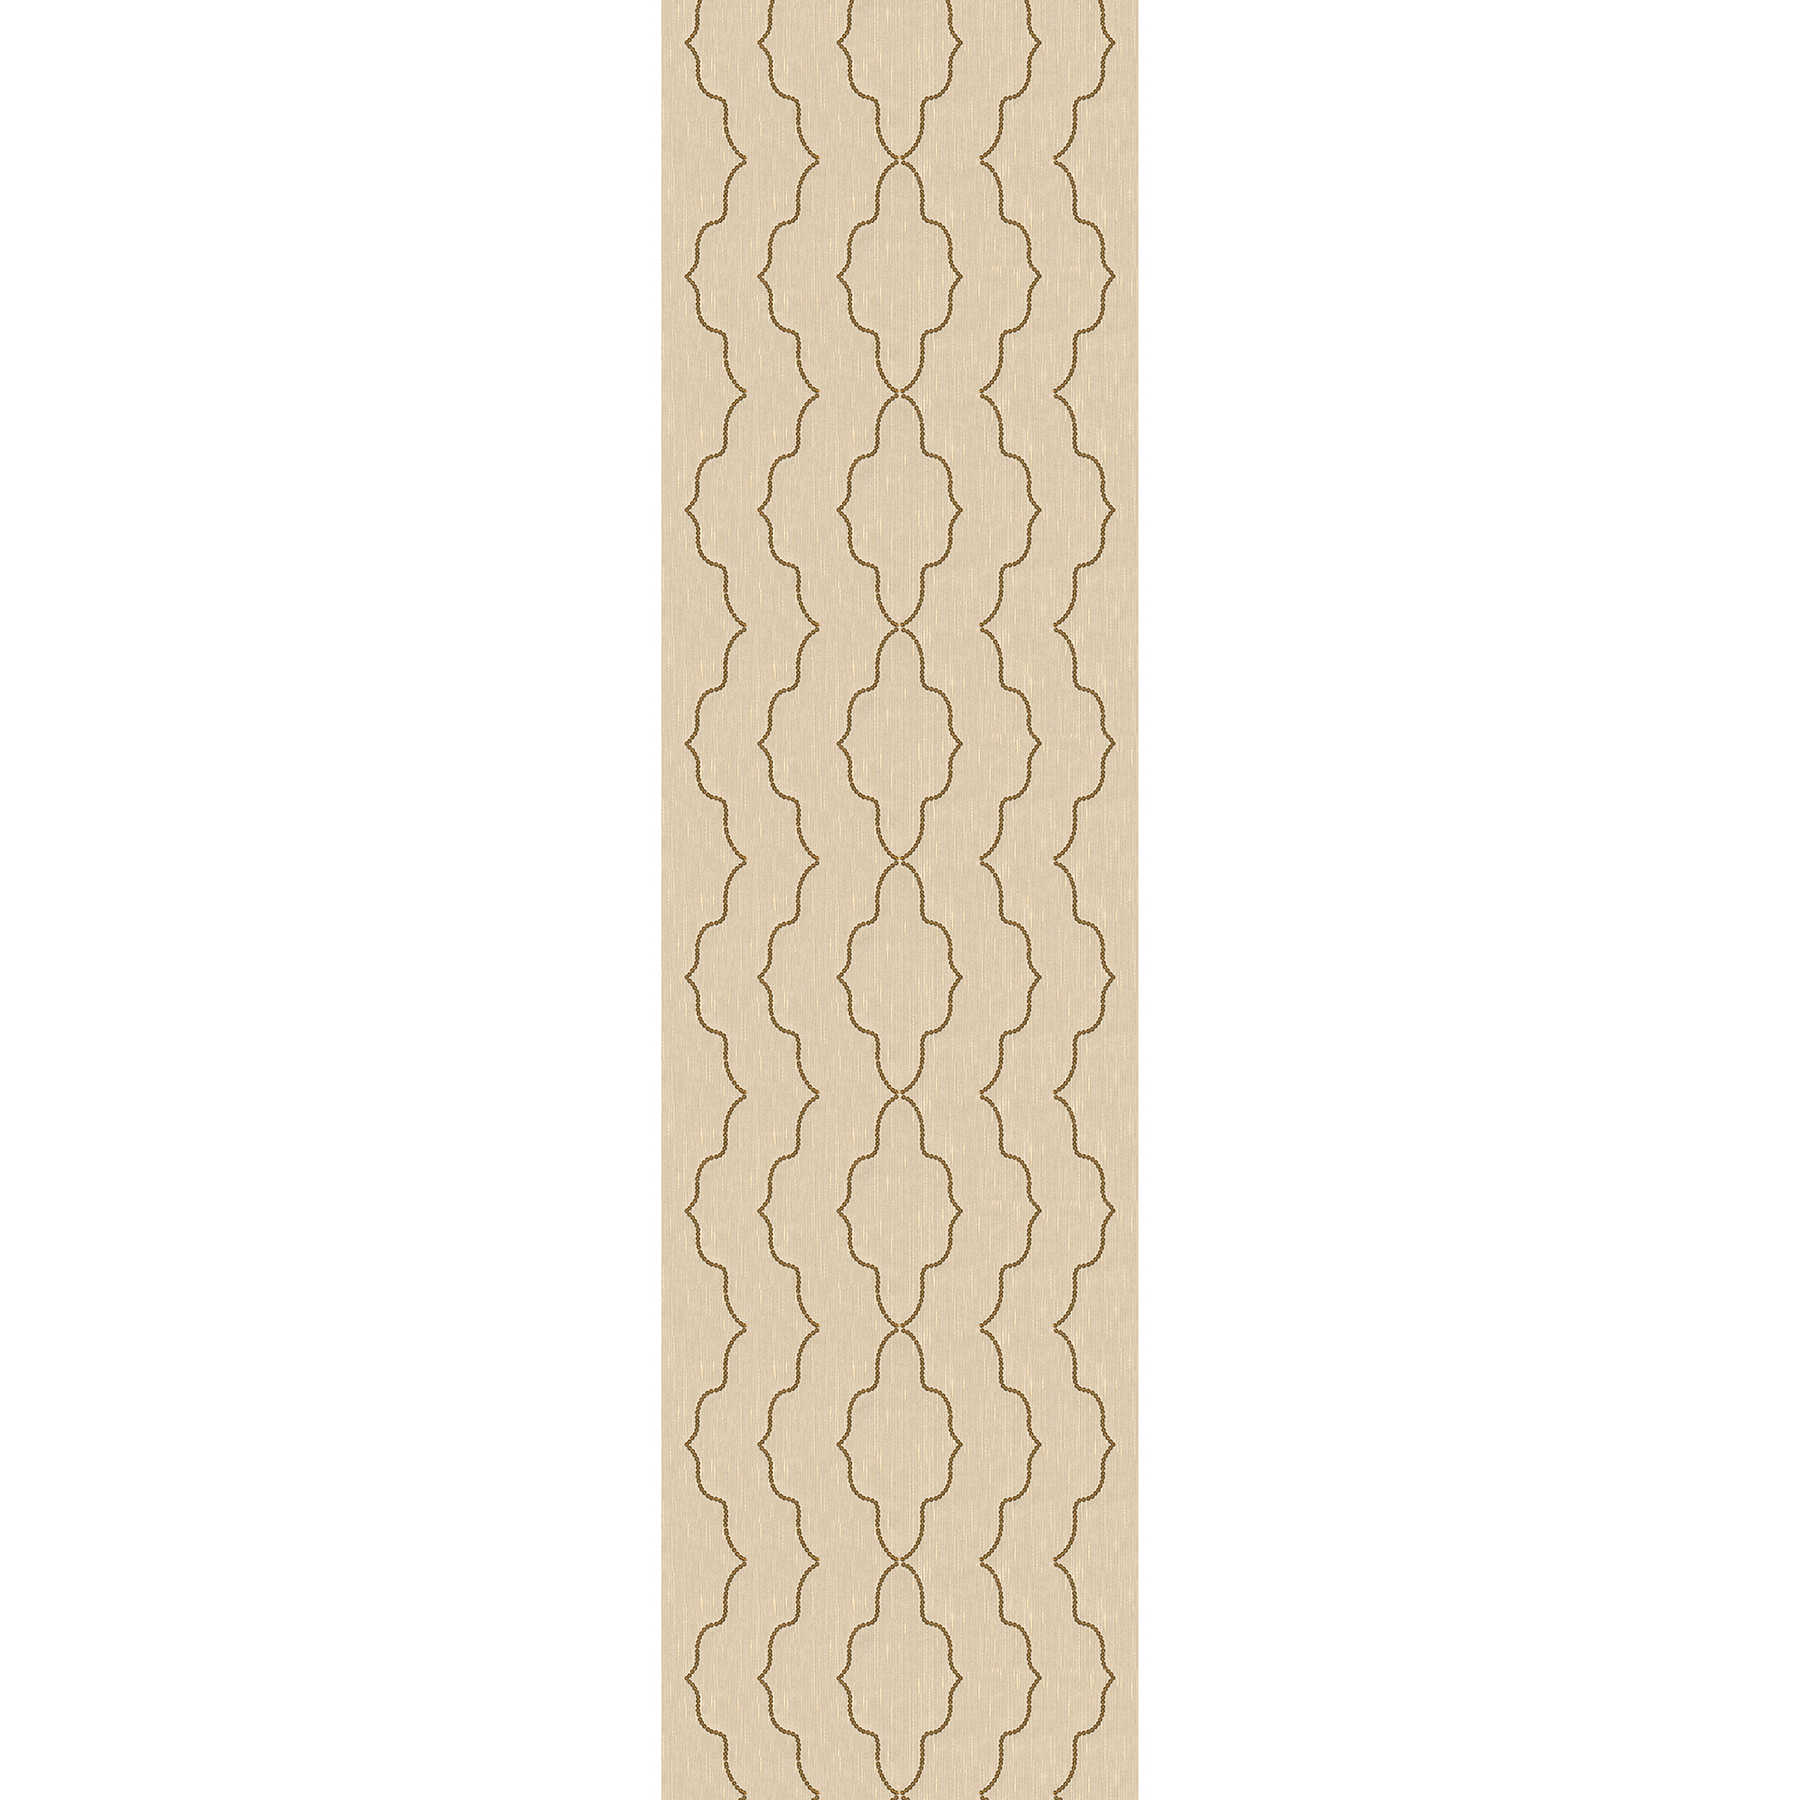         Graphic wallpaper with sequins & metallic effect - cream, gold
    